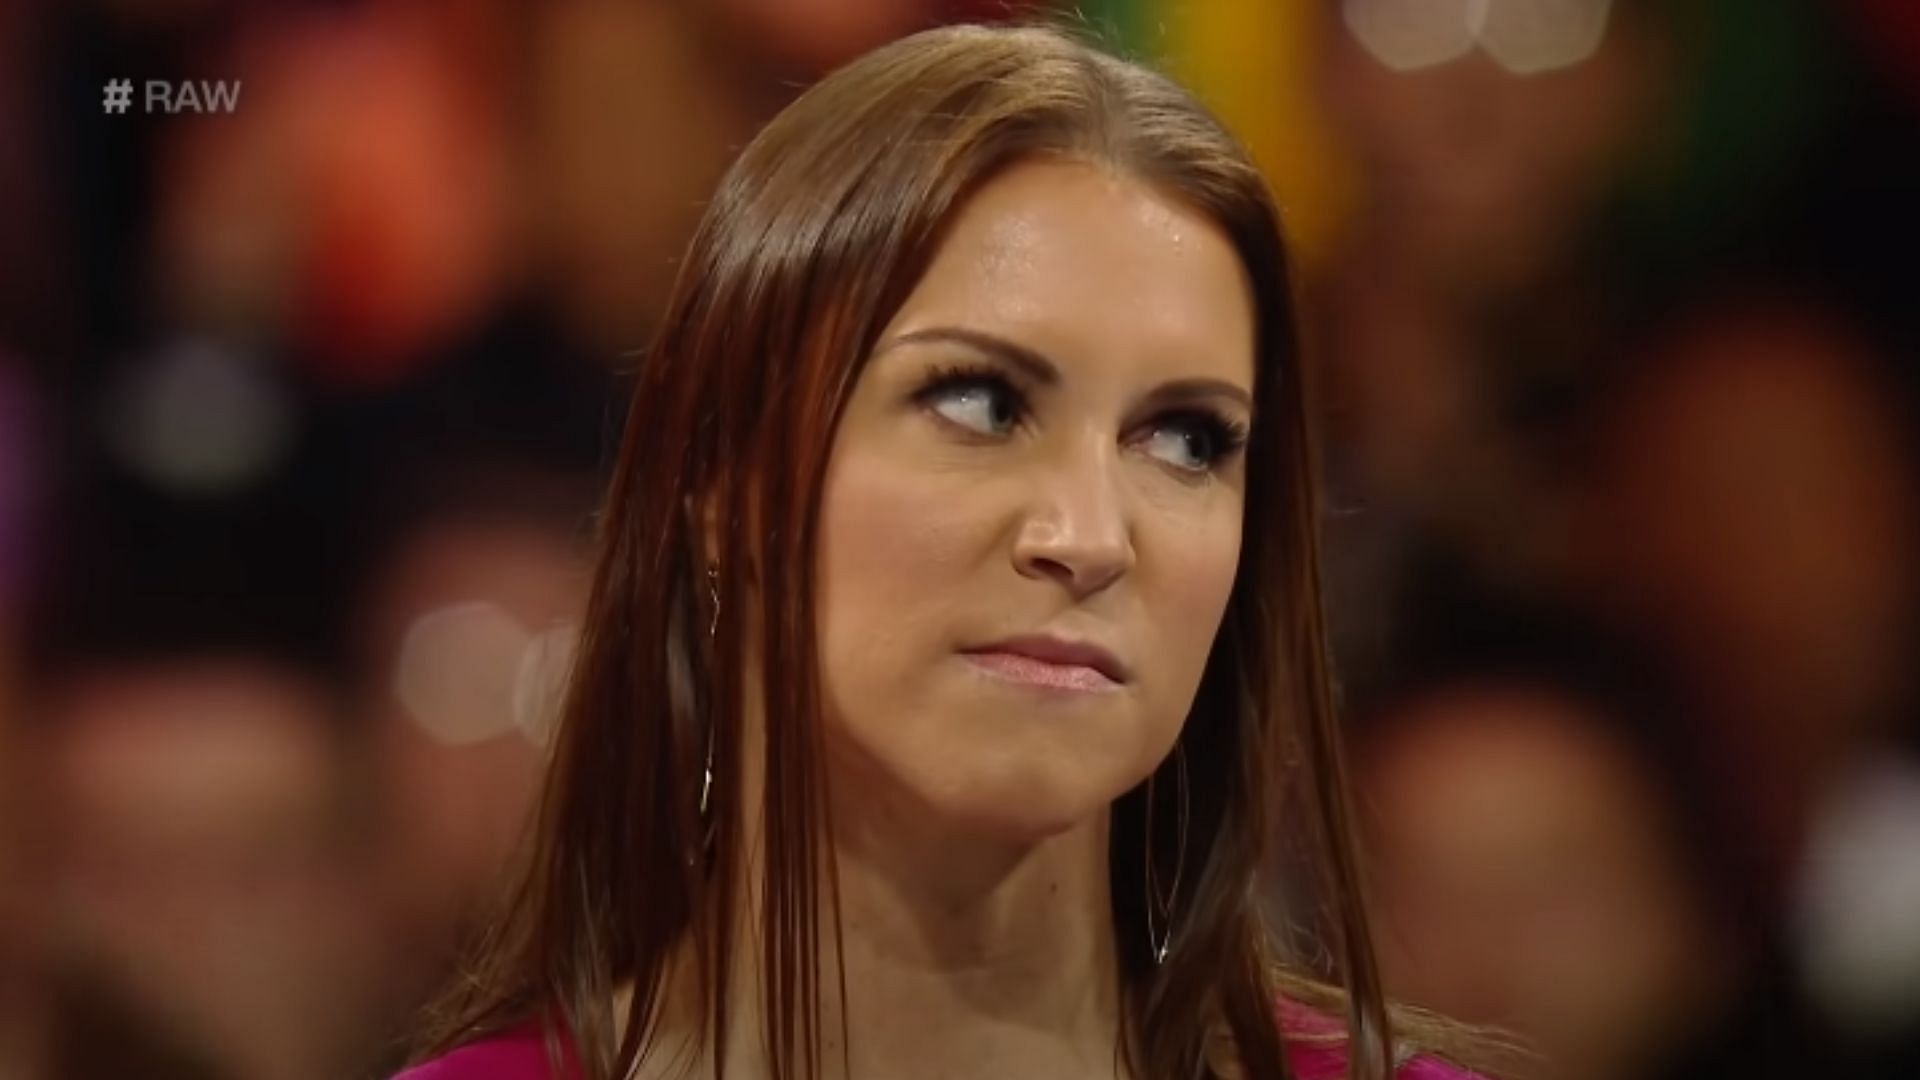 Stephanie McMahon announced that she would be stepping away from her role